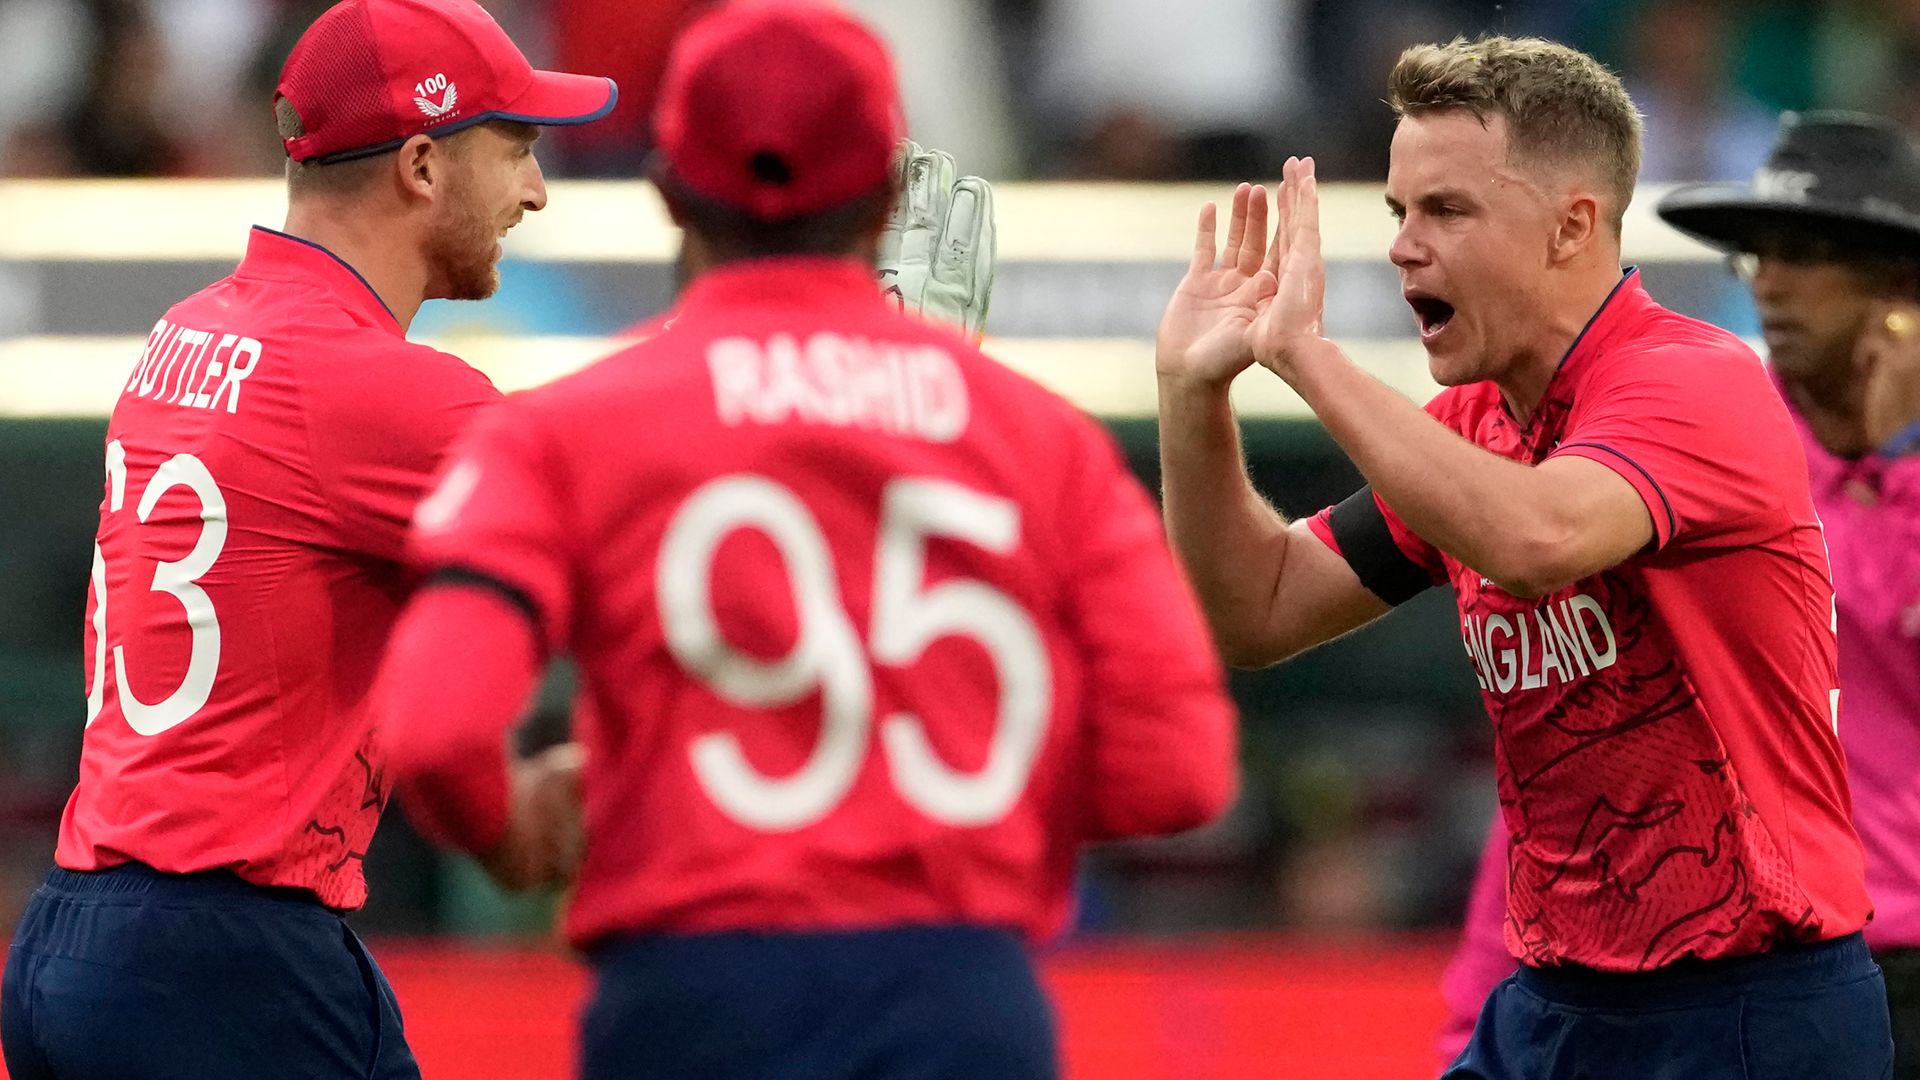 England too good in tournament of upsets: T20 World Cup review